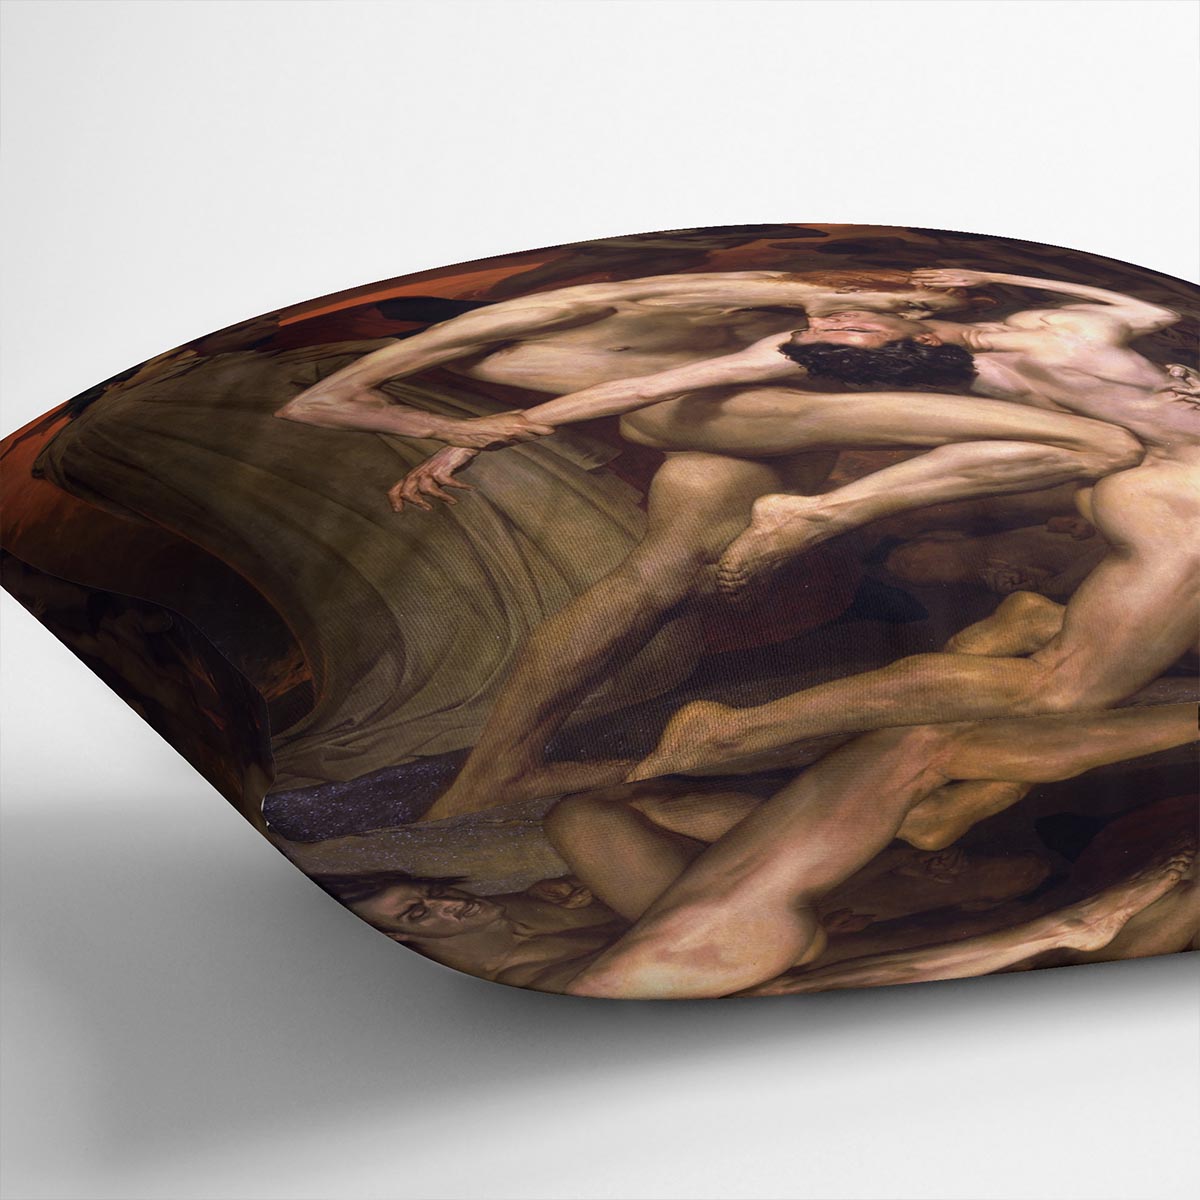 Dante And Virgil In Hell By Bouguereau Cushion